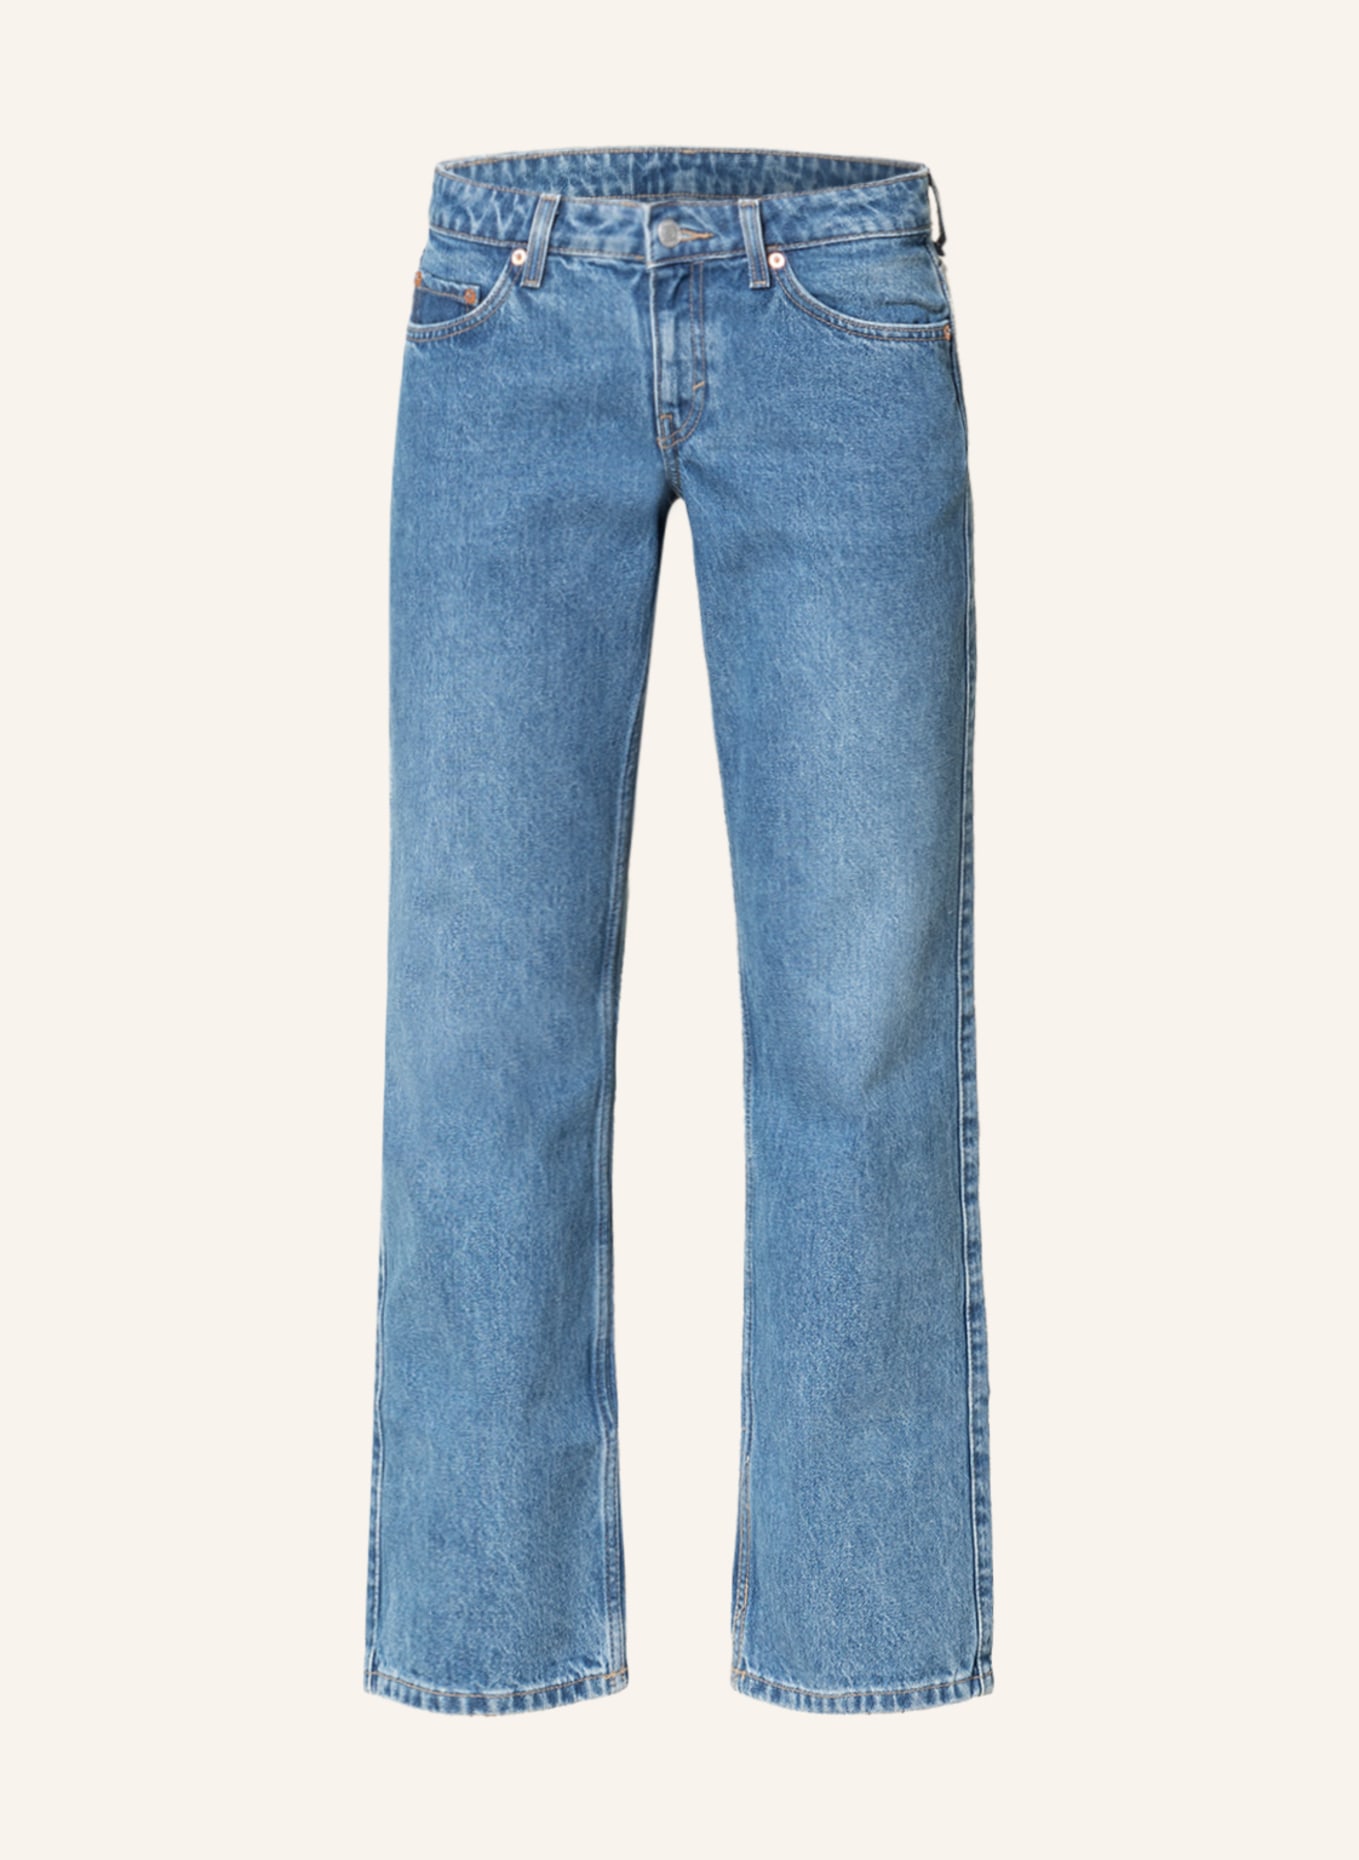 WEEKDAY Straight jeans, Color: 75-101 Blue Medium Dusty Harper Blue (Image 1)